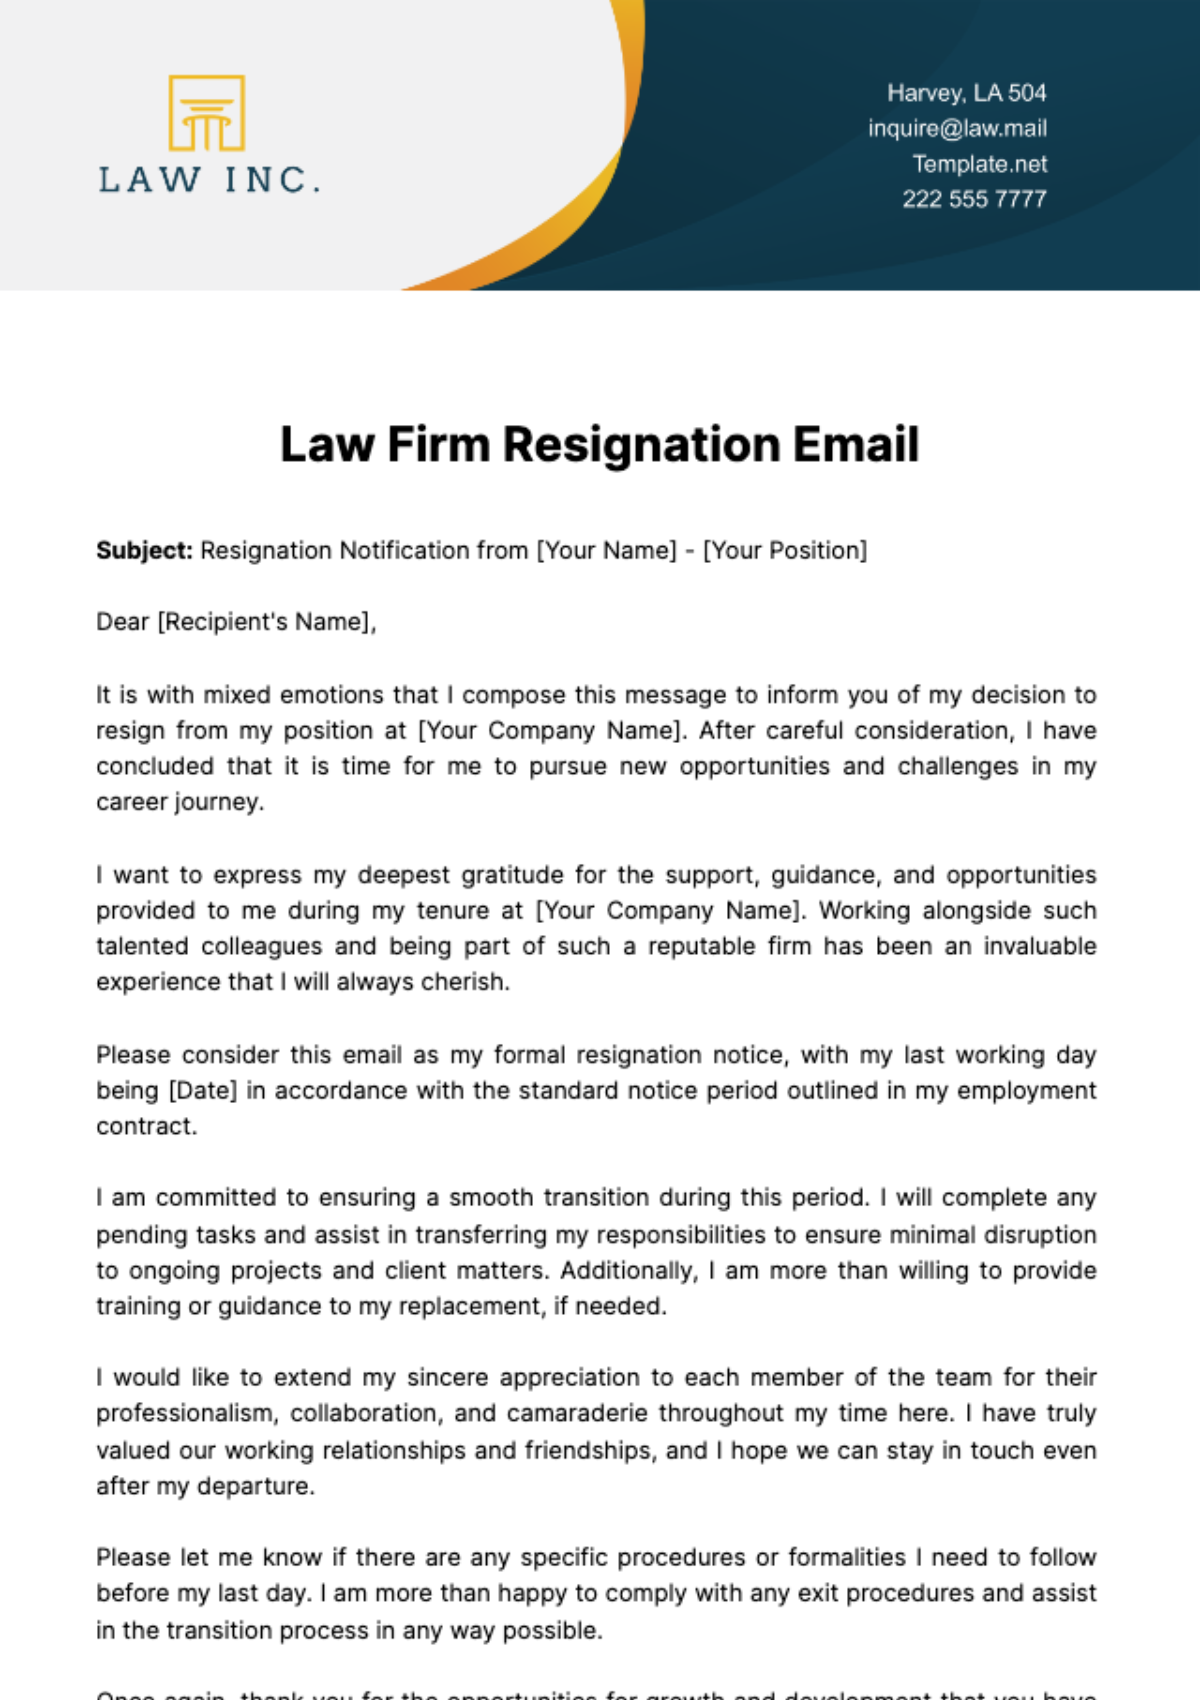 Free Law Firm Resignation Email Template